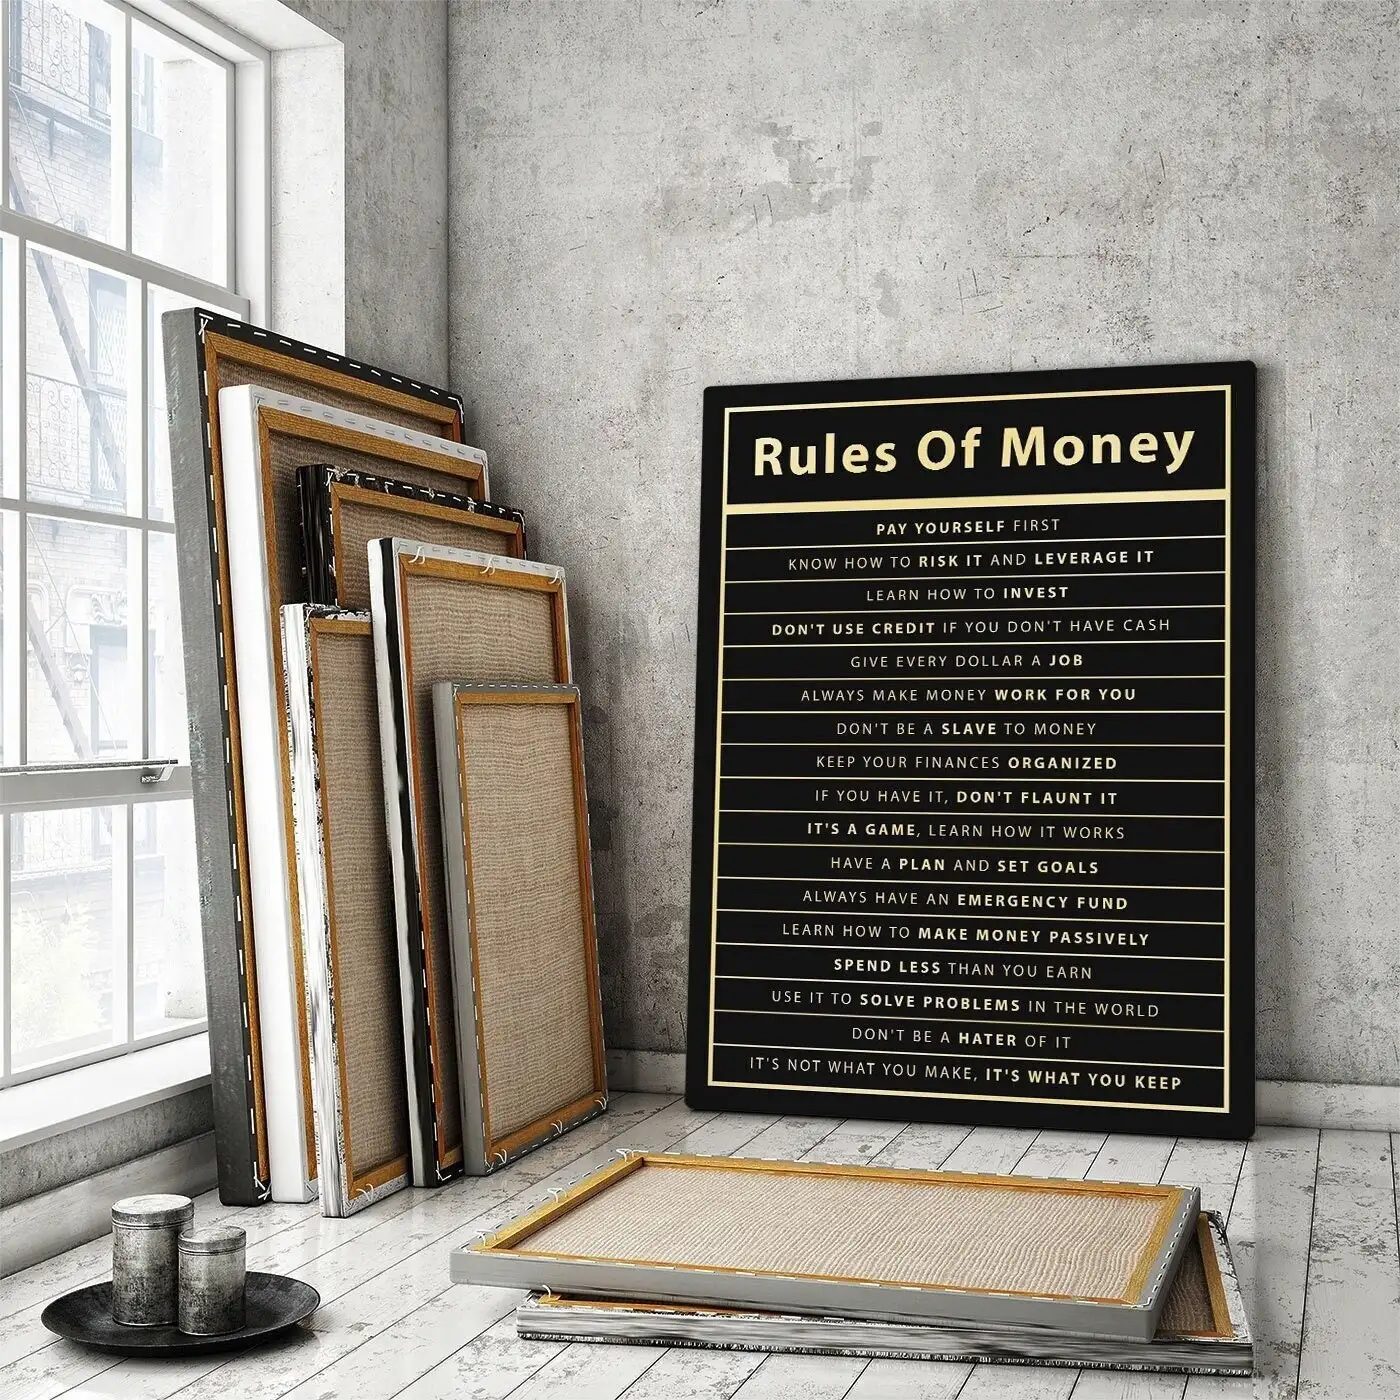 Rules Of Money Motivational Wall Art Canvas Print Office Decor Financial Poster Entrepreneur Millionaire Inspirational Quote